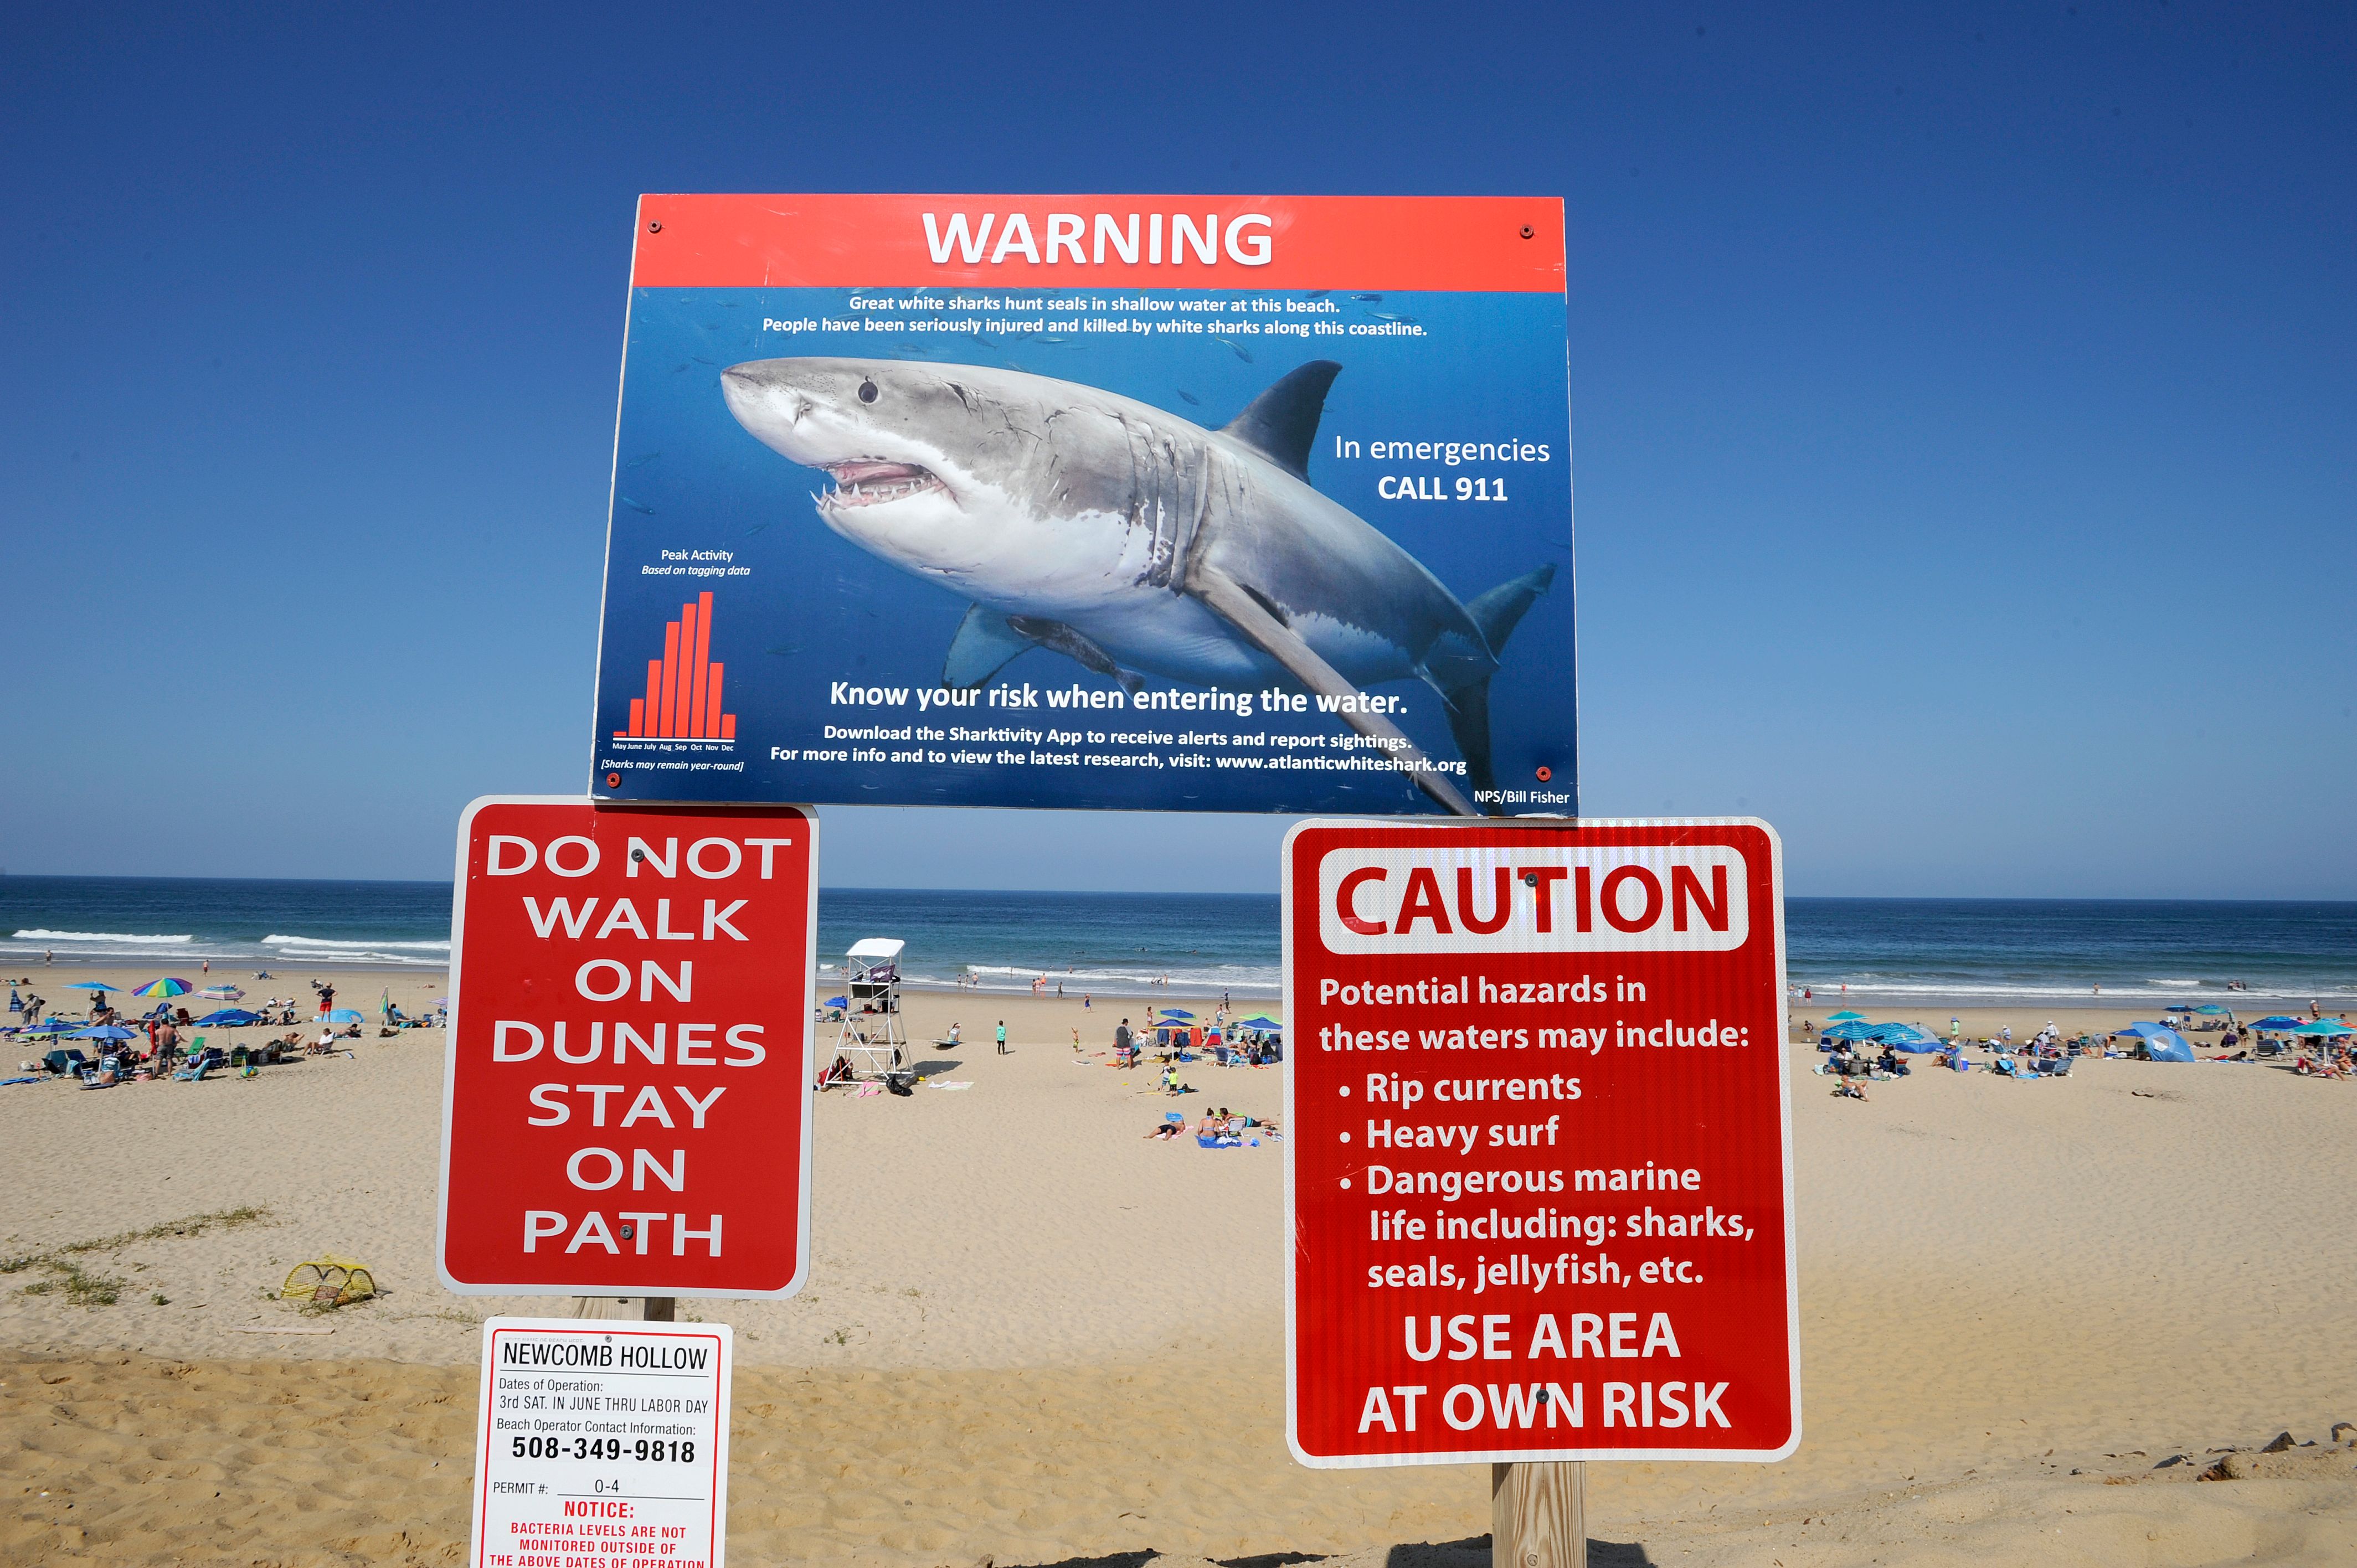 It seems graphic warning signs do little to influence beachgoers and swimmers